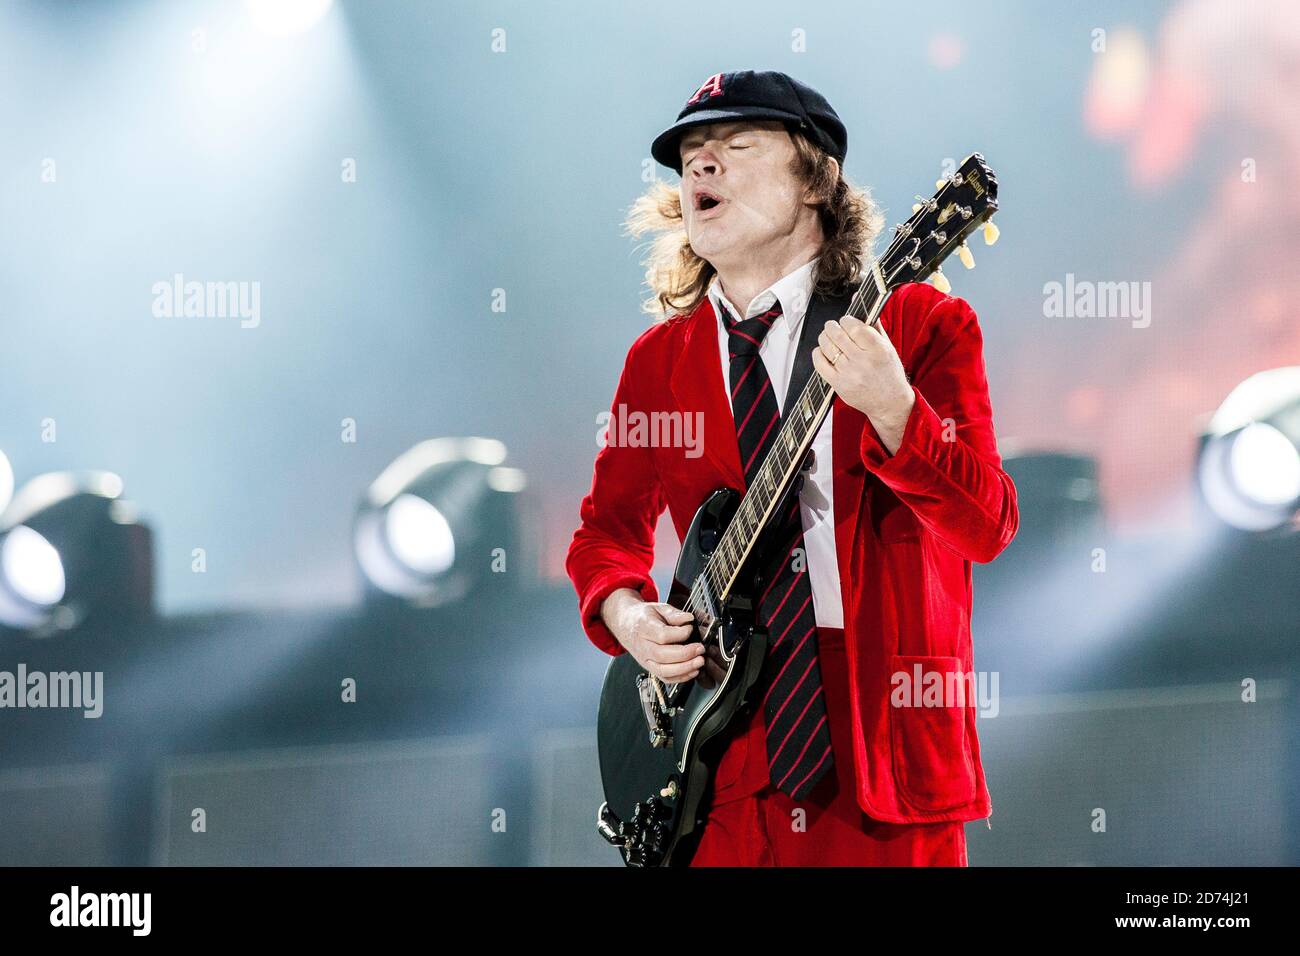 Copenhagen, Denmark. 15th, July 2015. The Australian rock band AC/DC  performs a live concert at Dyreskuepladsen in Roskilde as part of the Rock  or Bust World 2015 Tour. Here guitarist Angus Young